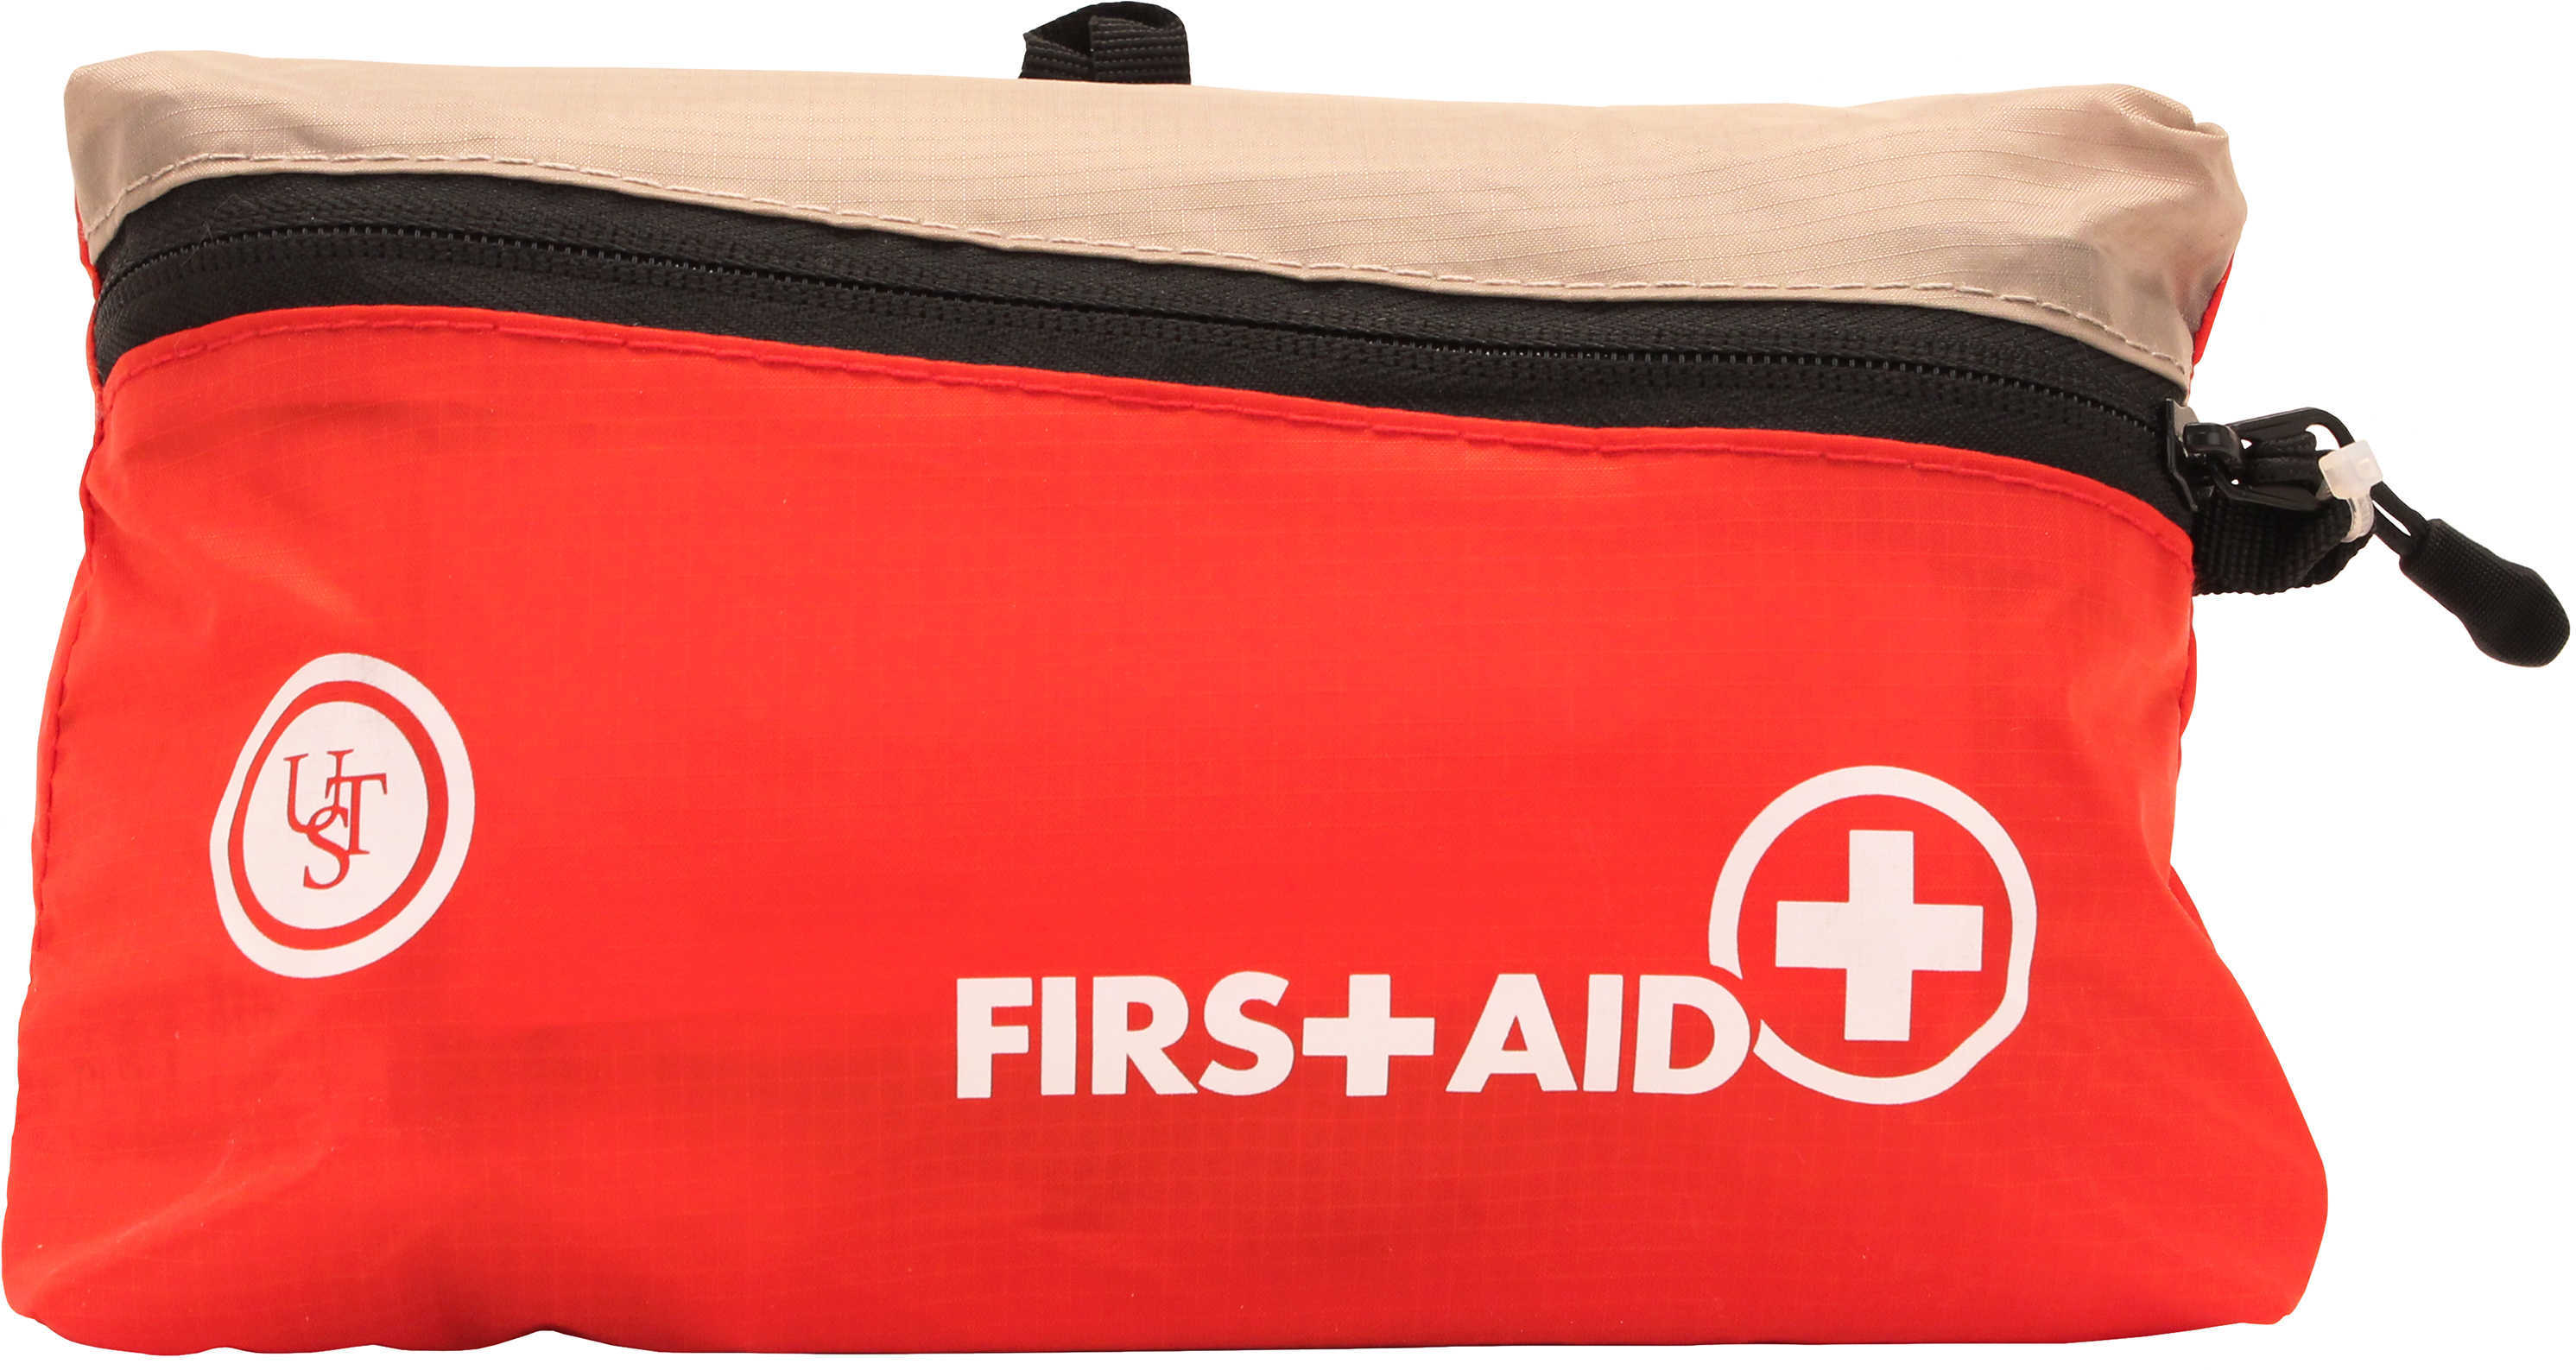 UST - Ultimate Survival Technologies Featherlite First Aid Kit 2.0 125 Pieces Red Finish Contains: Acetaminophen (4) Alc